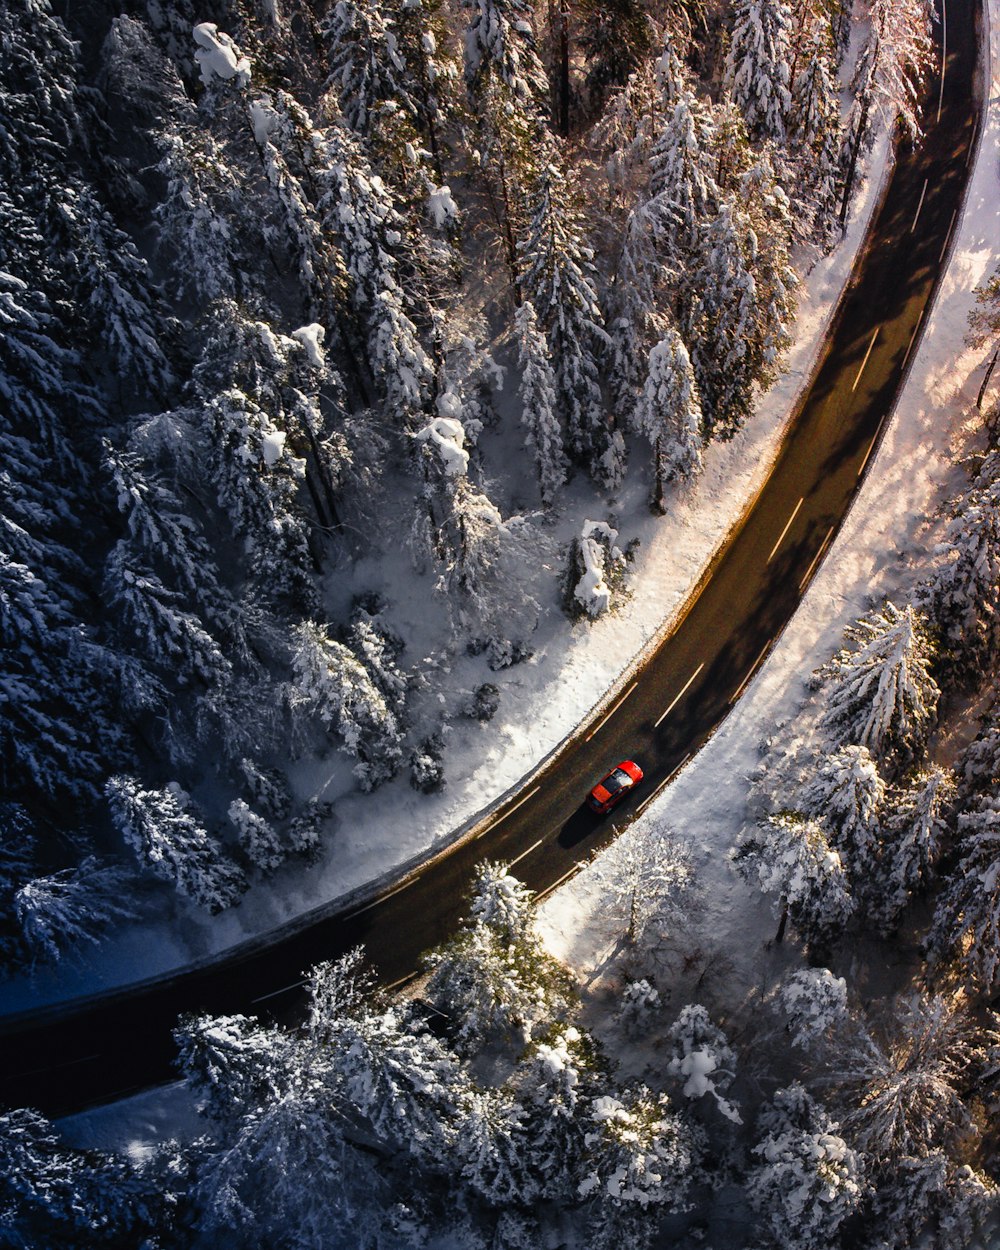 an aerial view of a road in the middle of a snowy forest